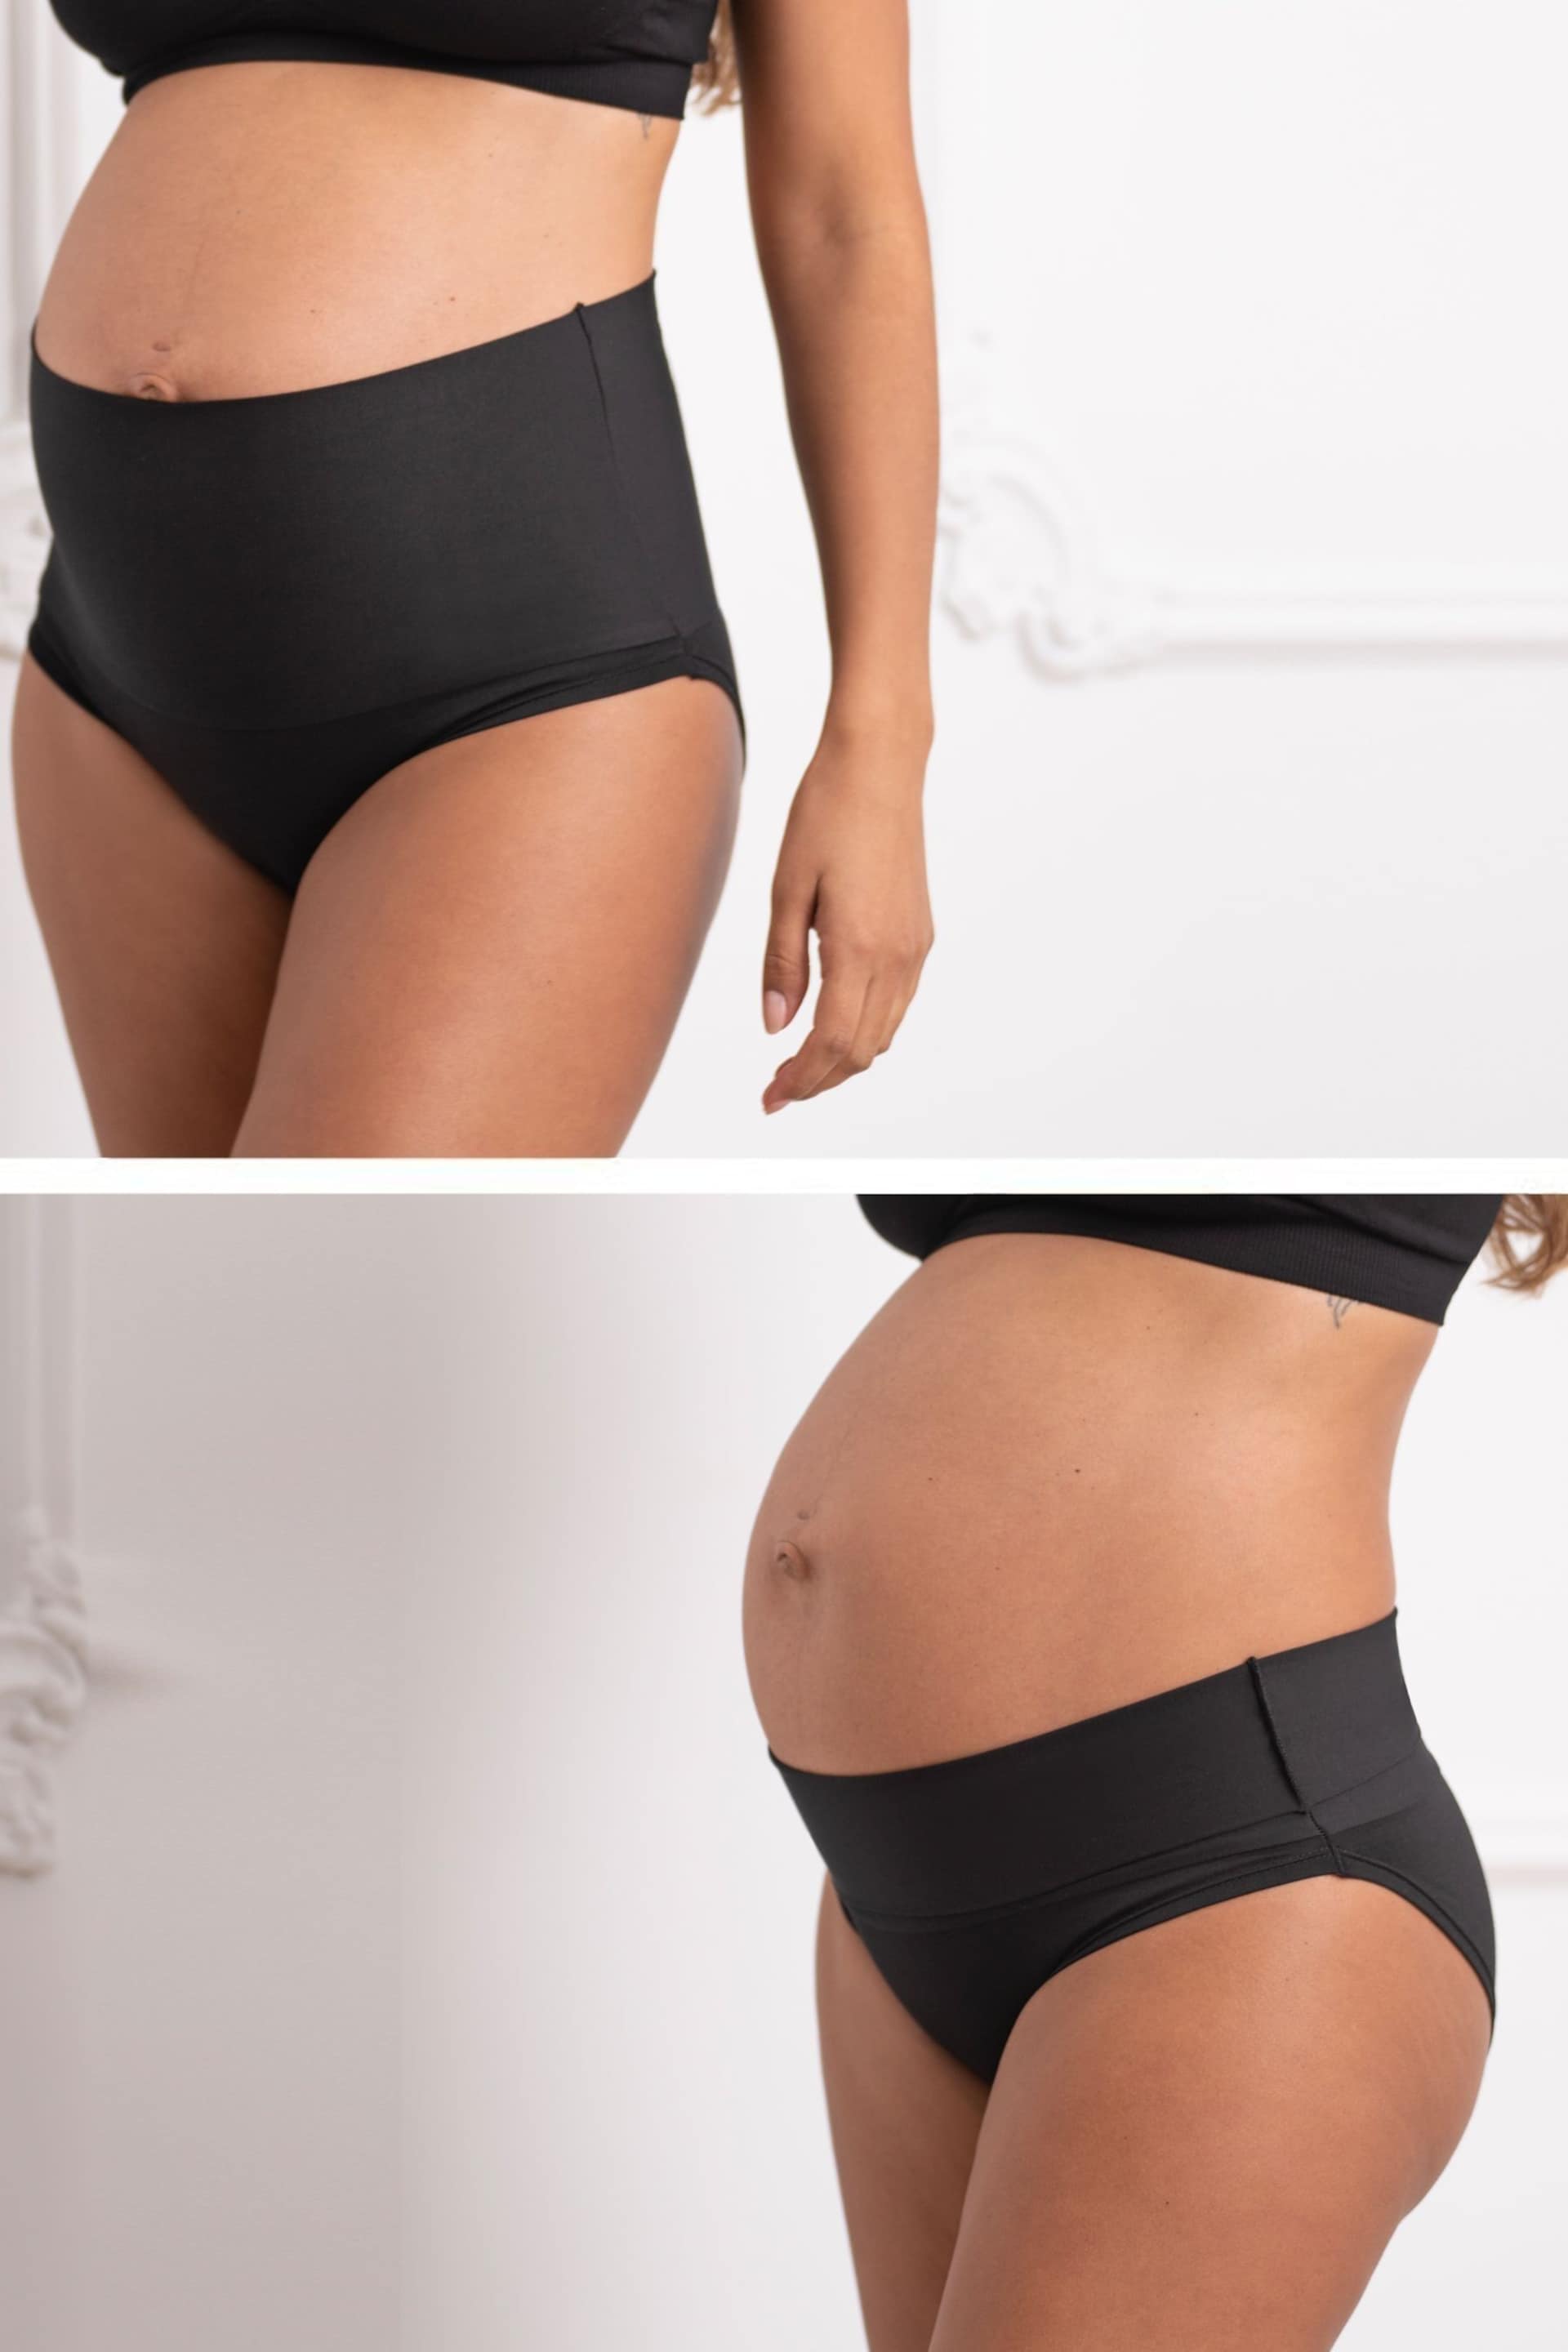 Seraphine Folded Waist Black Maternity and Post Maternity Briefs 2 Pack - Image 1 of 8